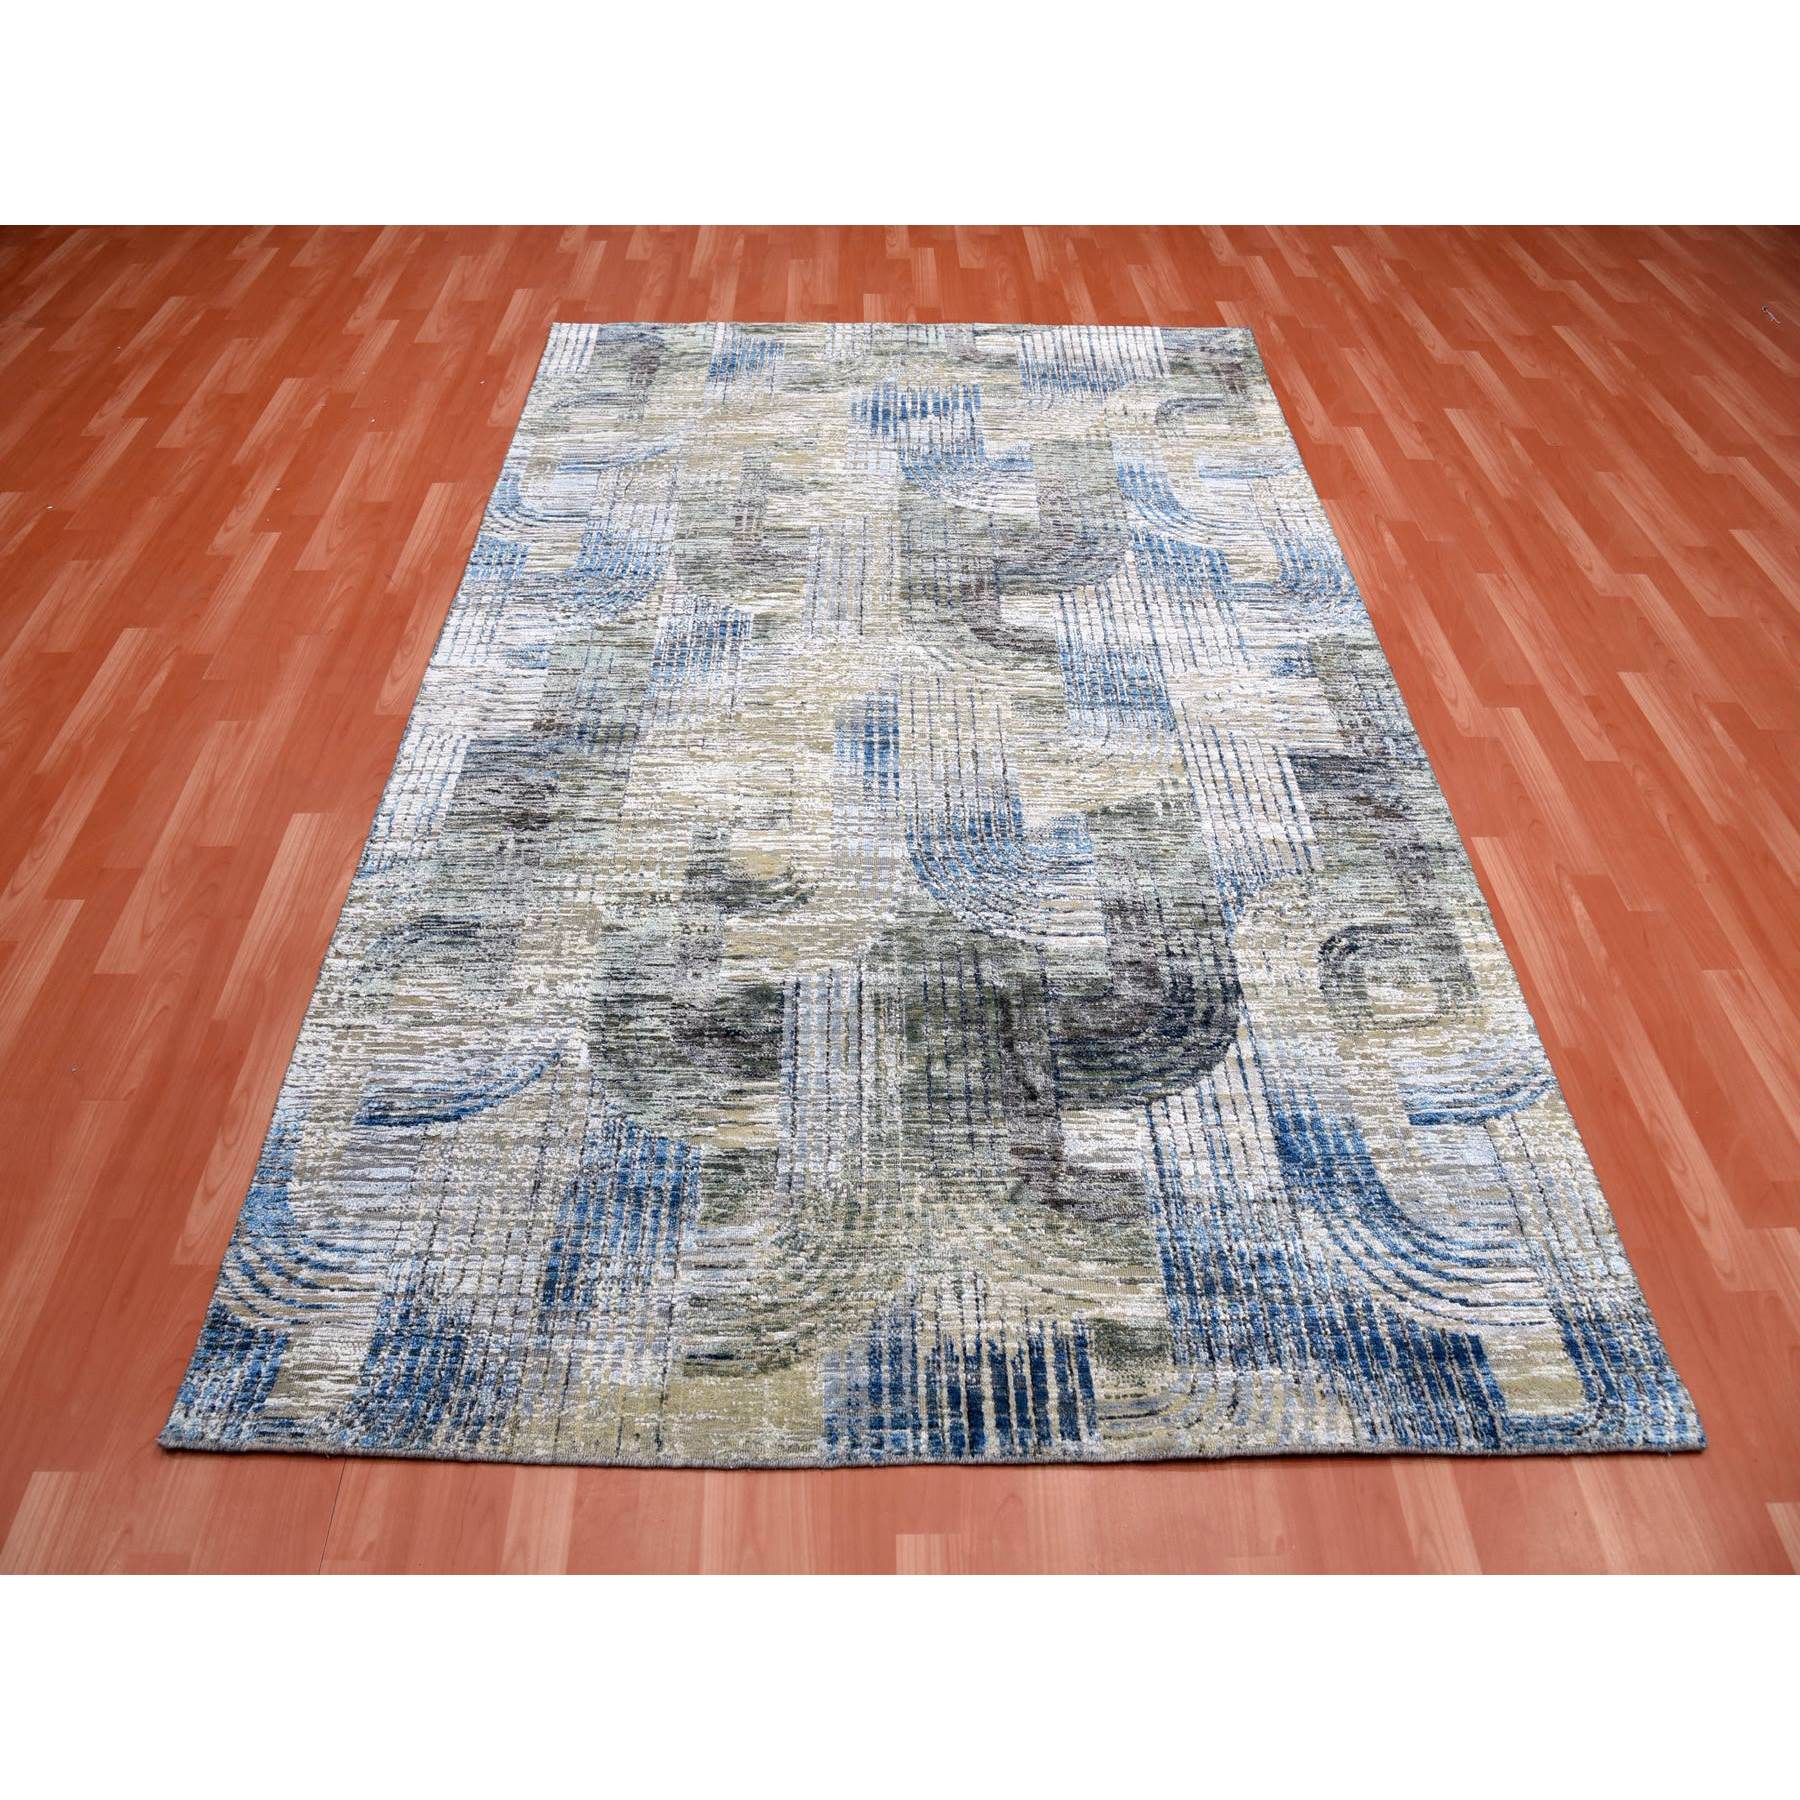 6'x9' THE INTERTWINED PASSAGE, Hand Woven, Silk with Textured Wool, Oriental Rug 